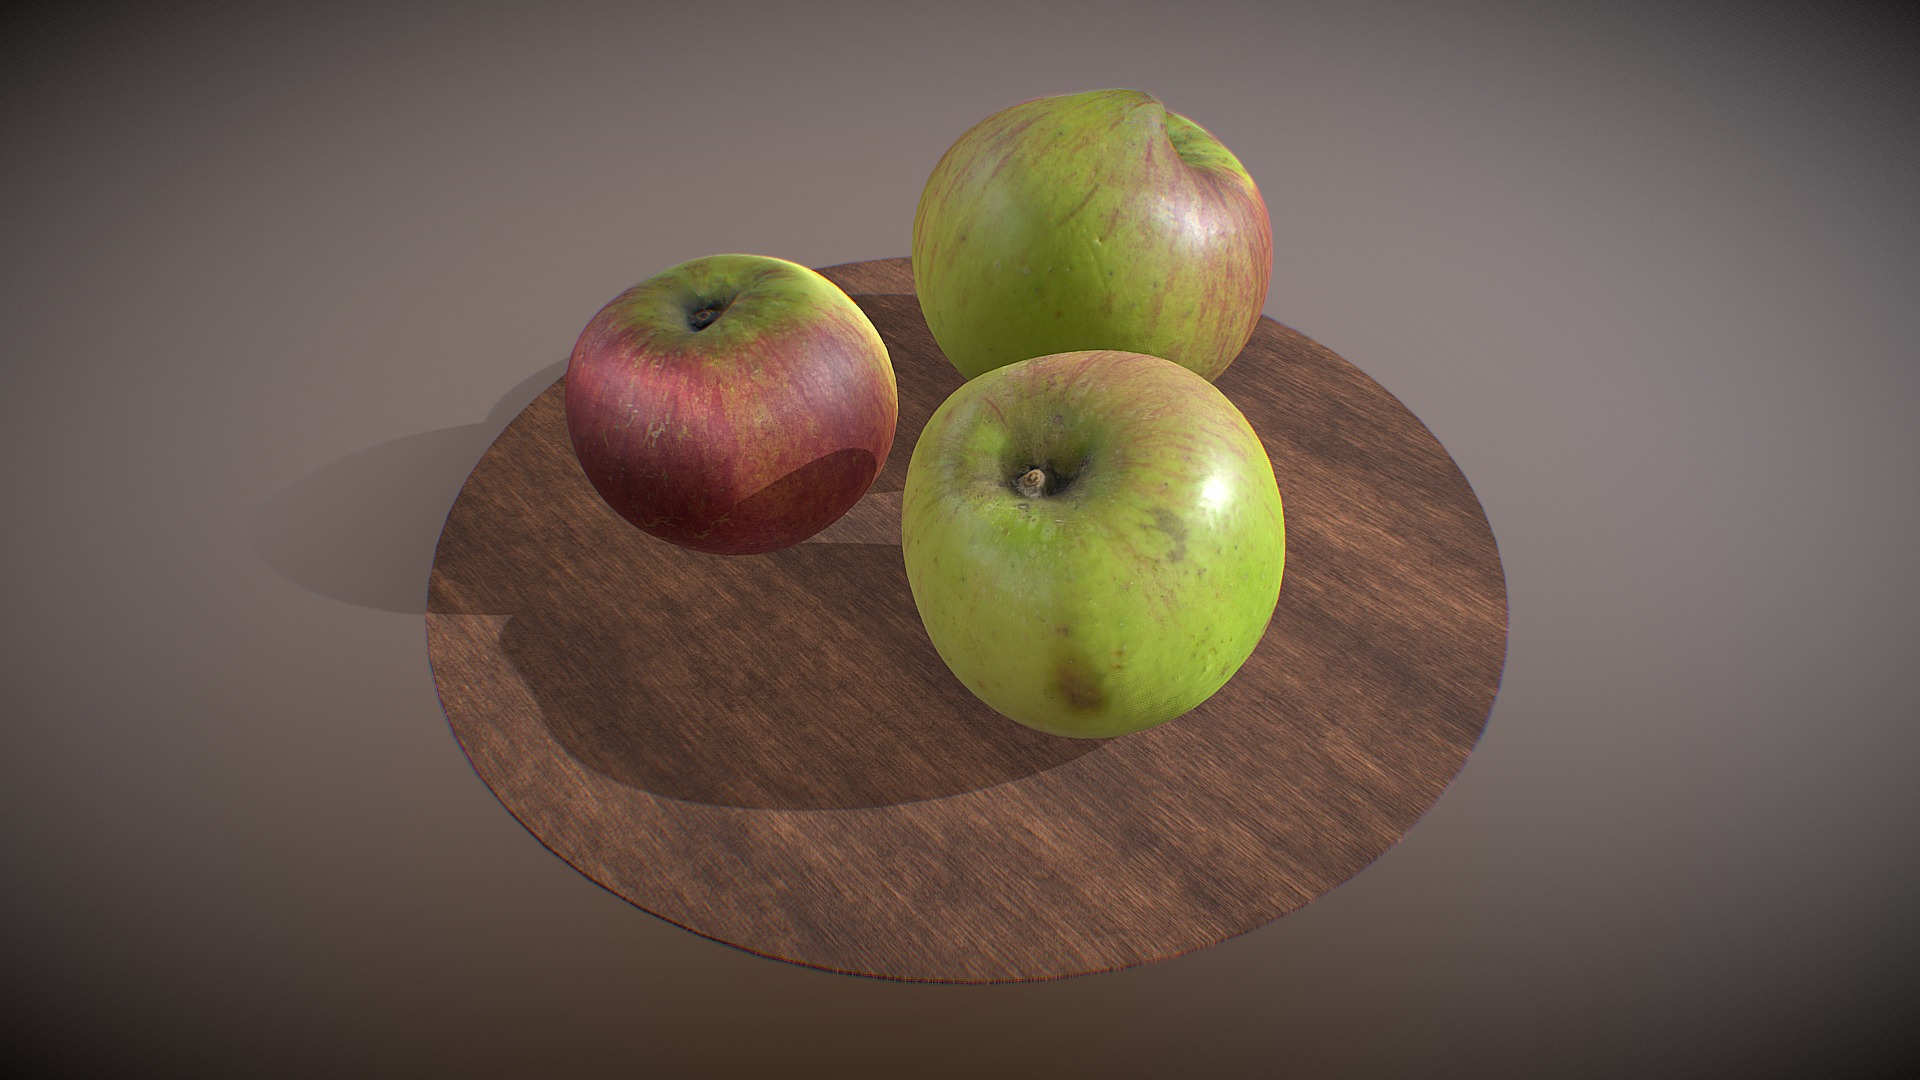 3D model Bramley cooking apple three pack photogrammetry - This is a 3D model of the Bramley cooking apple three pack photogrammetry. The 3D model is about a group of apples on a wooden board.